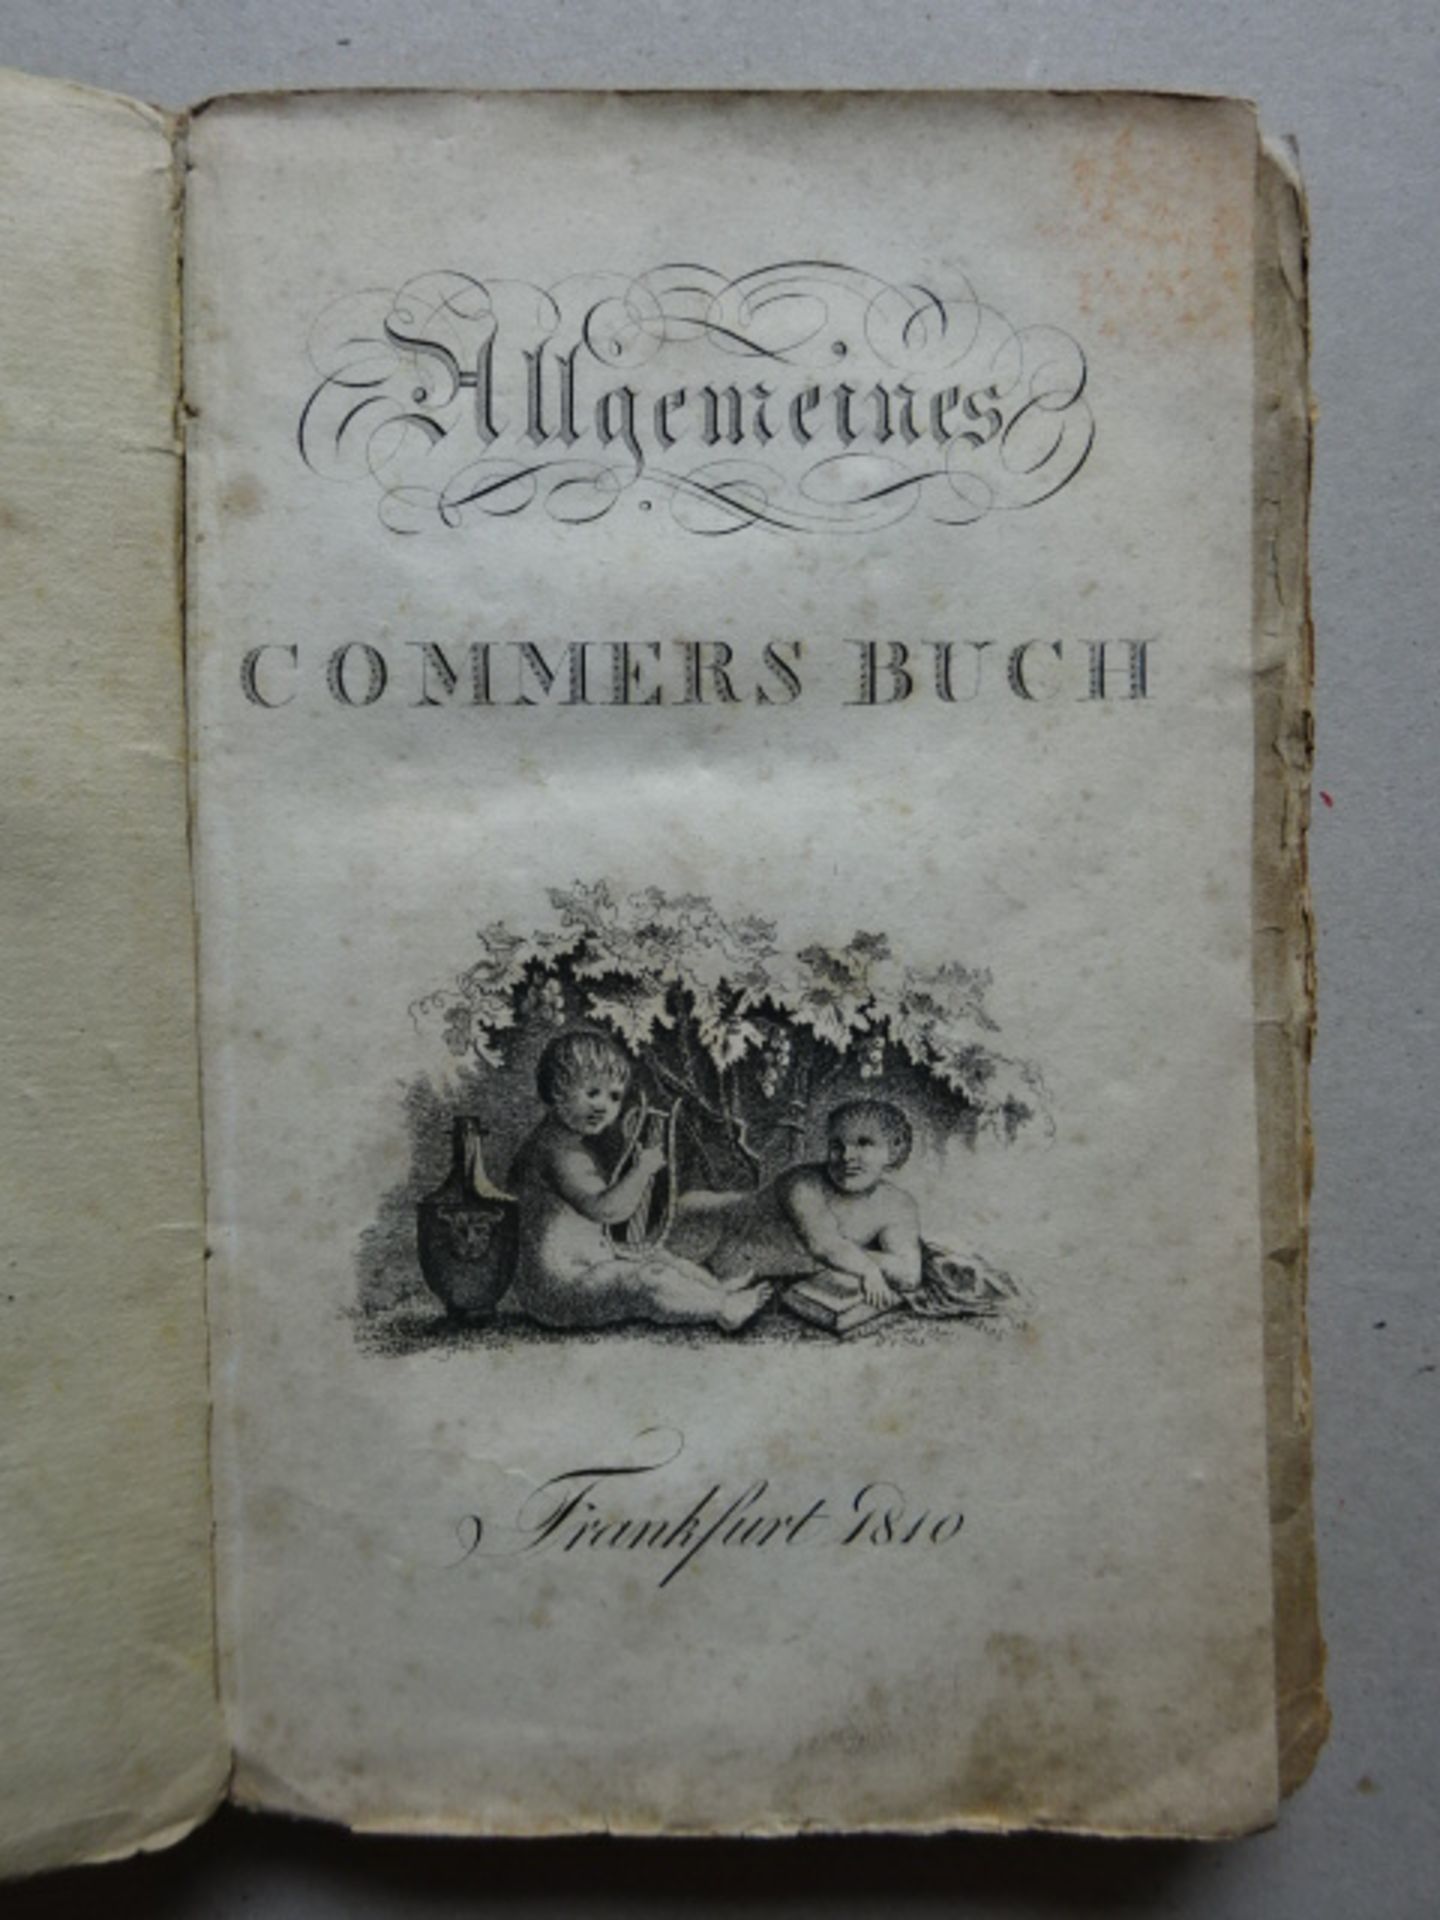 Commersbuch, 1810 - Image 2 of 4